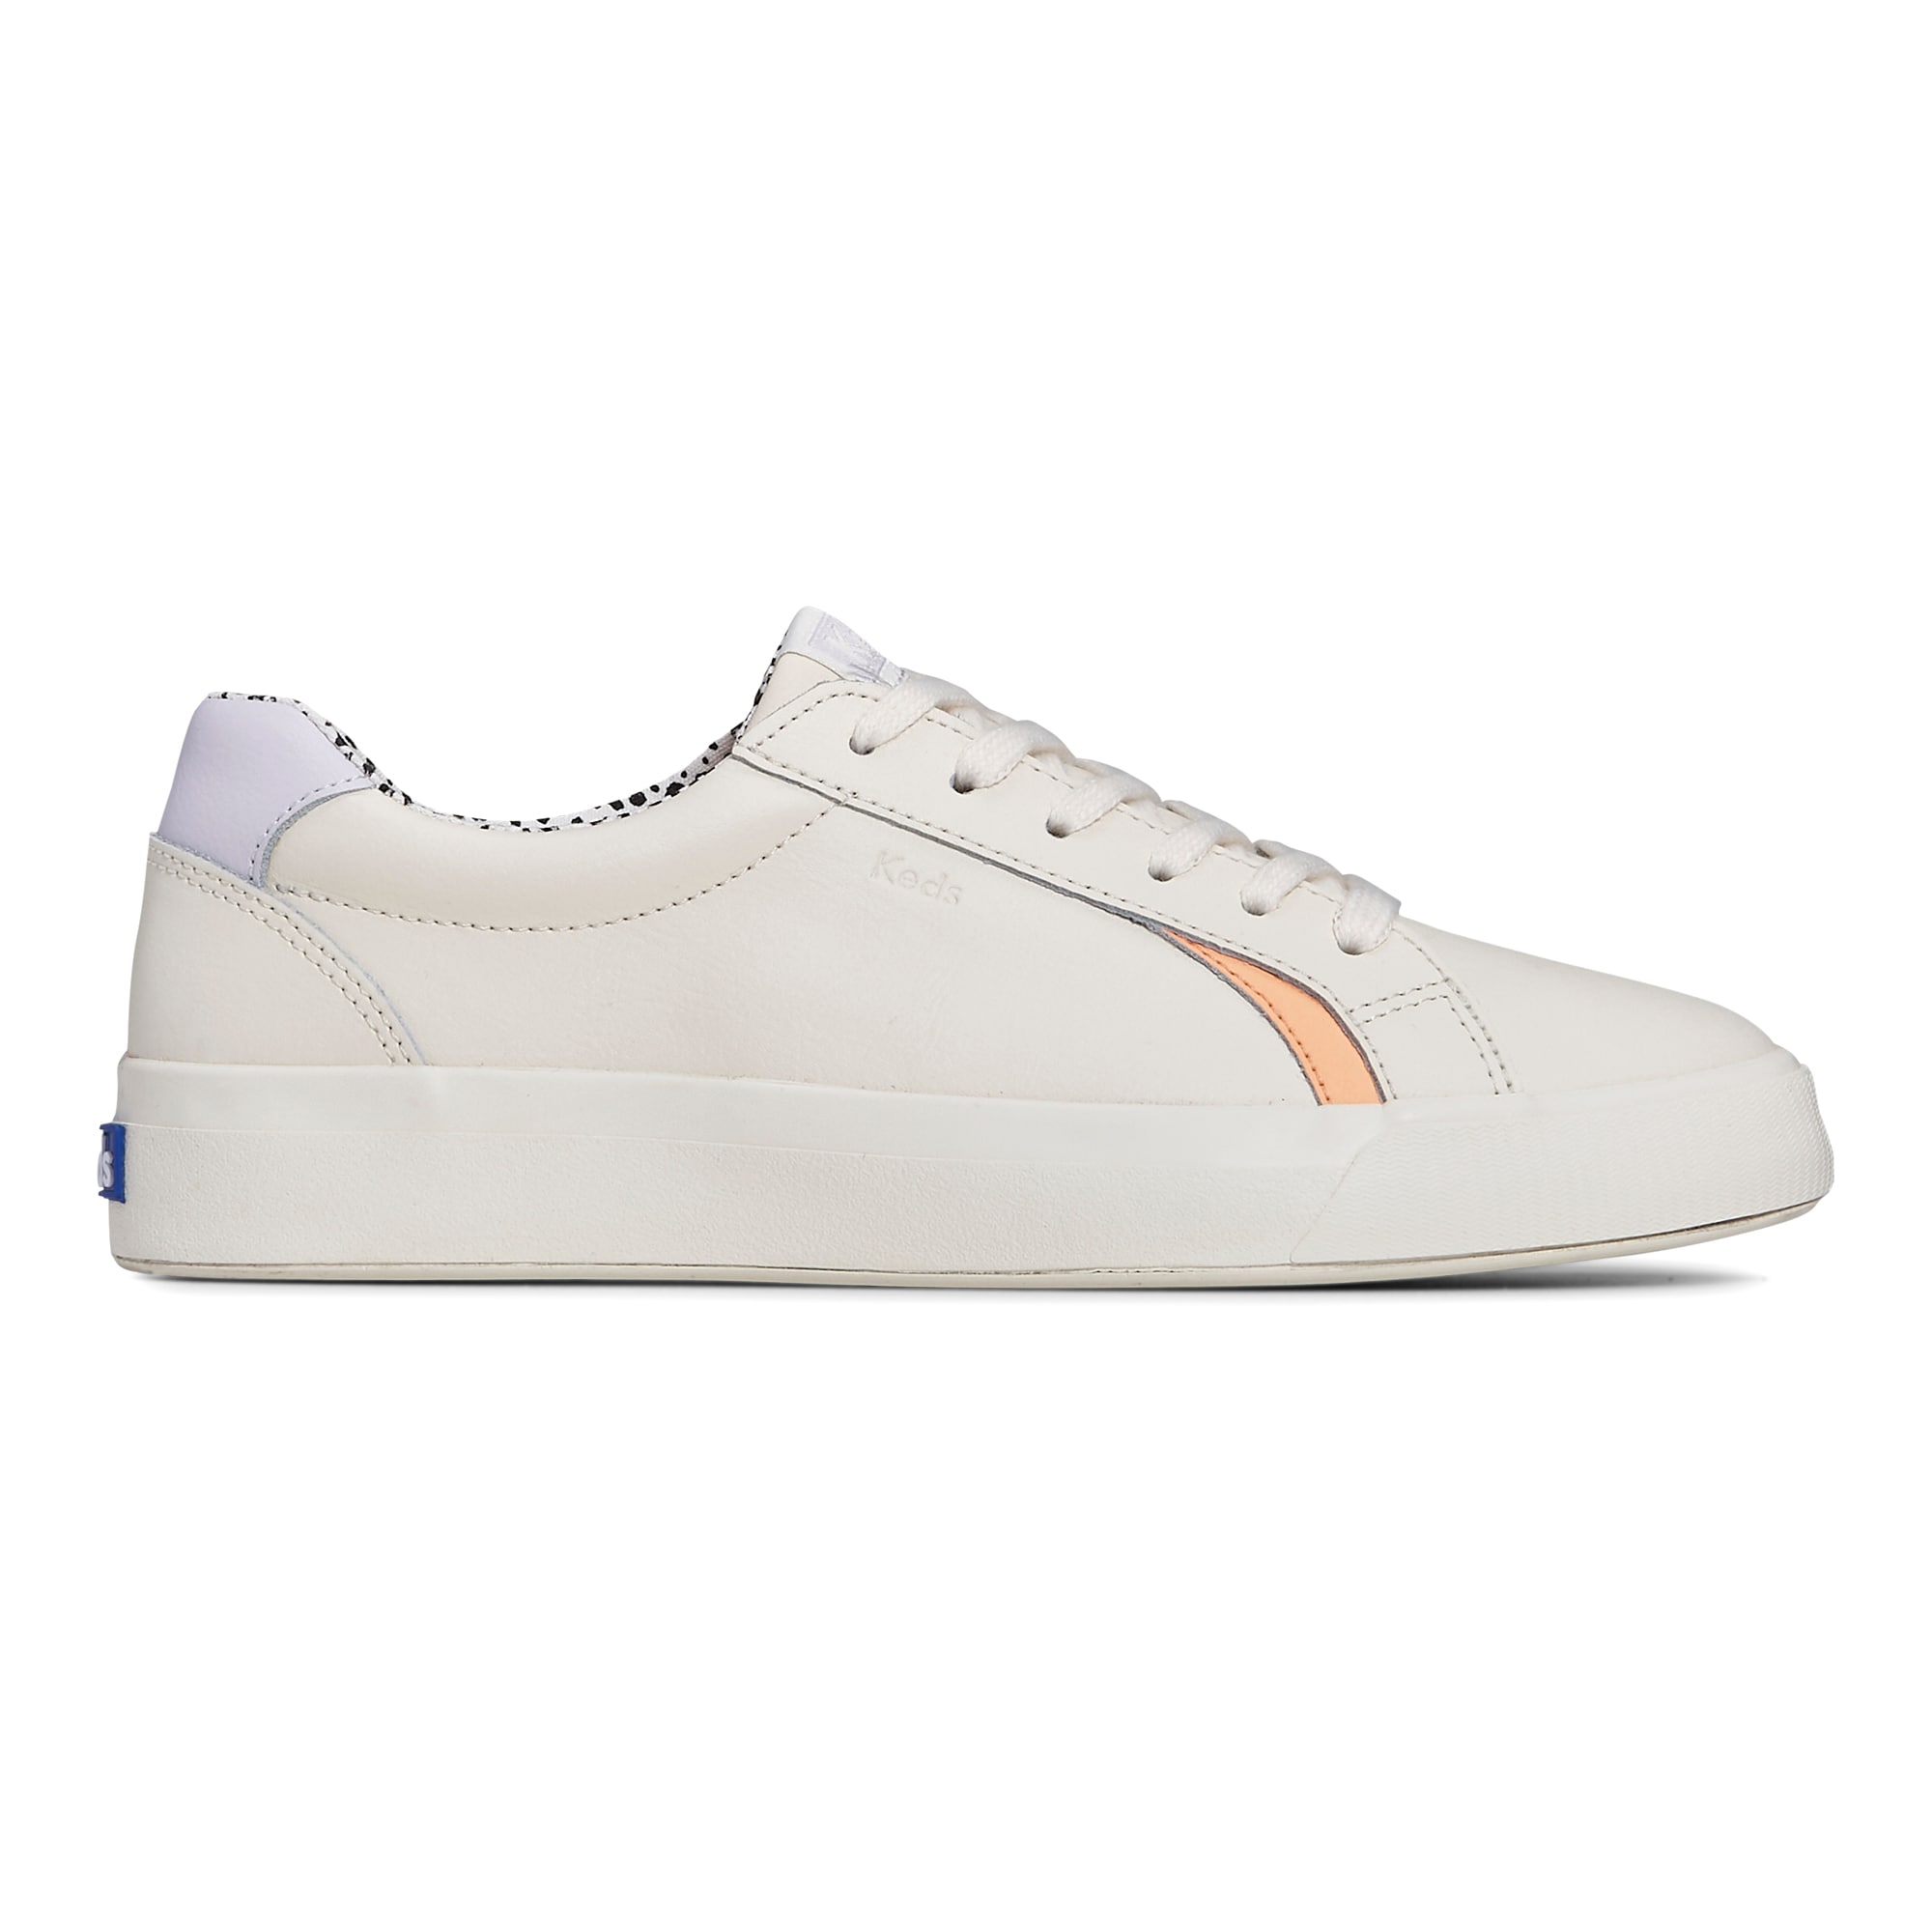 Keds Pursuit Leather Pop Lining Lace Up - Free Shipping | KEDS